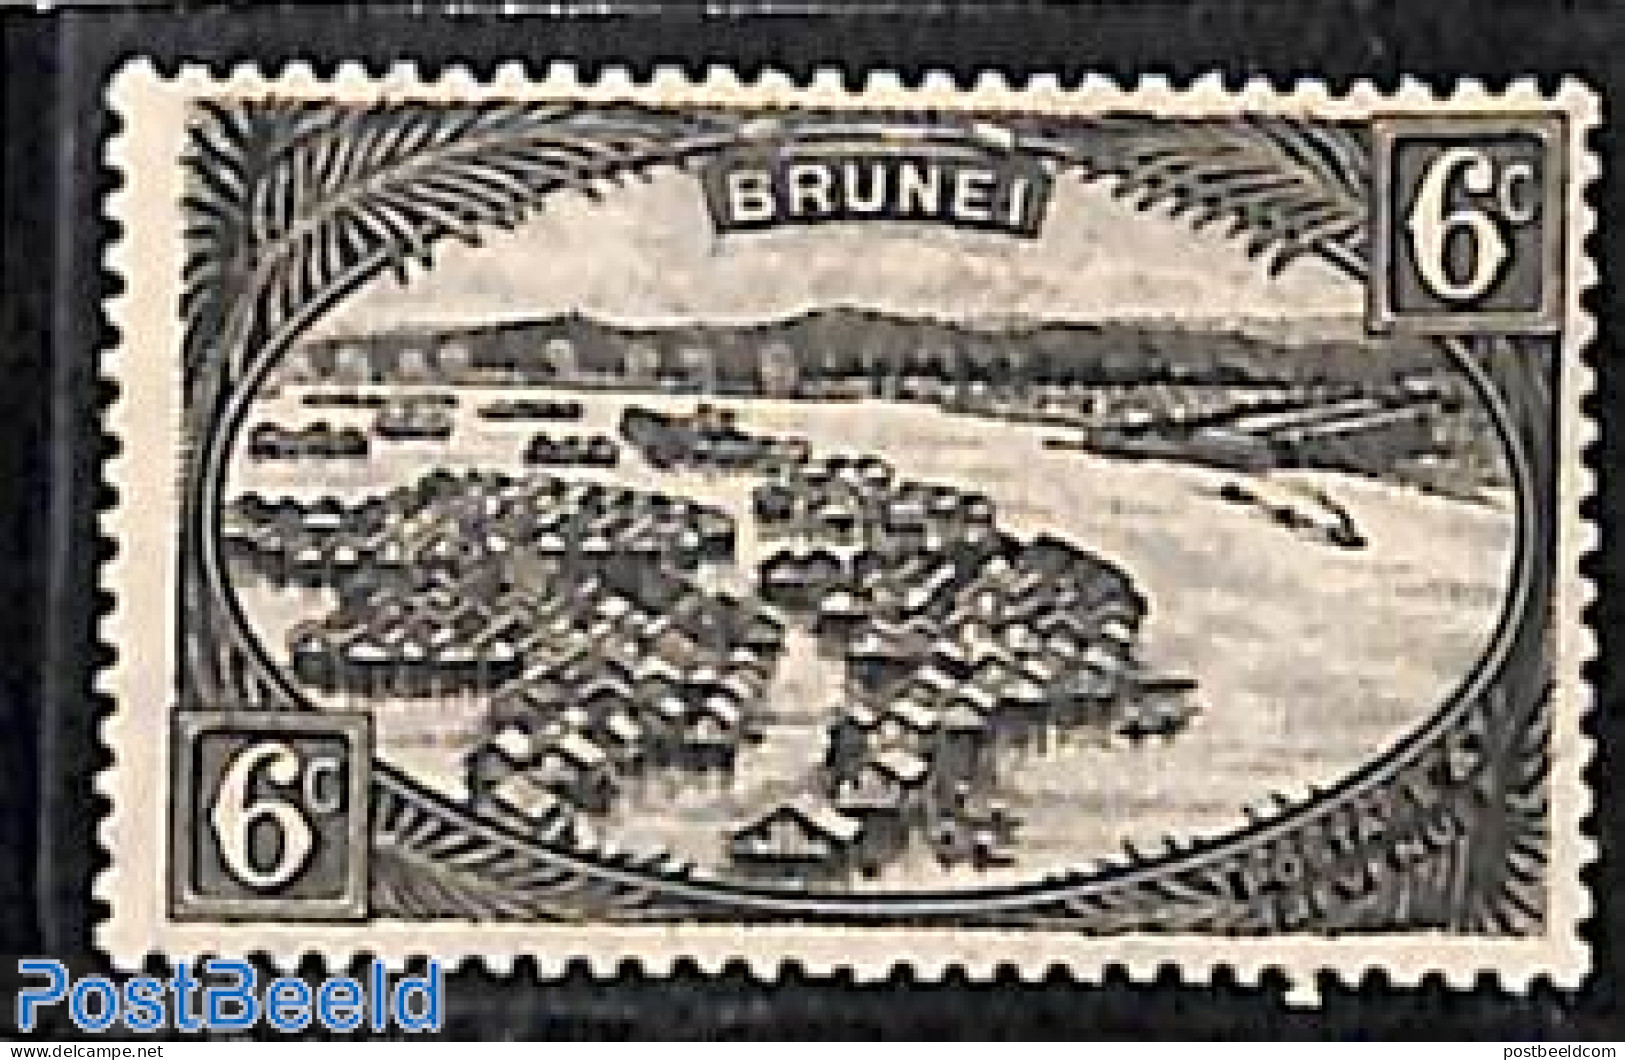 Brunei 1924 6c, (38mm), WM Script.CA, Stamp Out Of Set, Unused (hinged), Transport - Ships And Boats - Ships